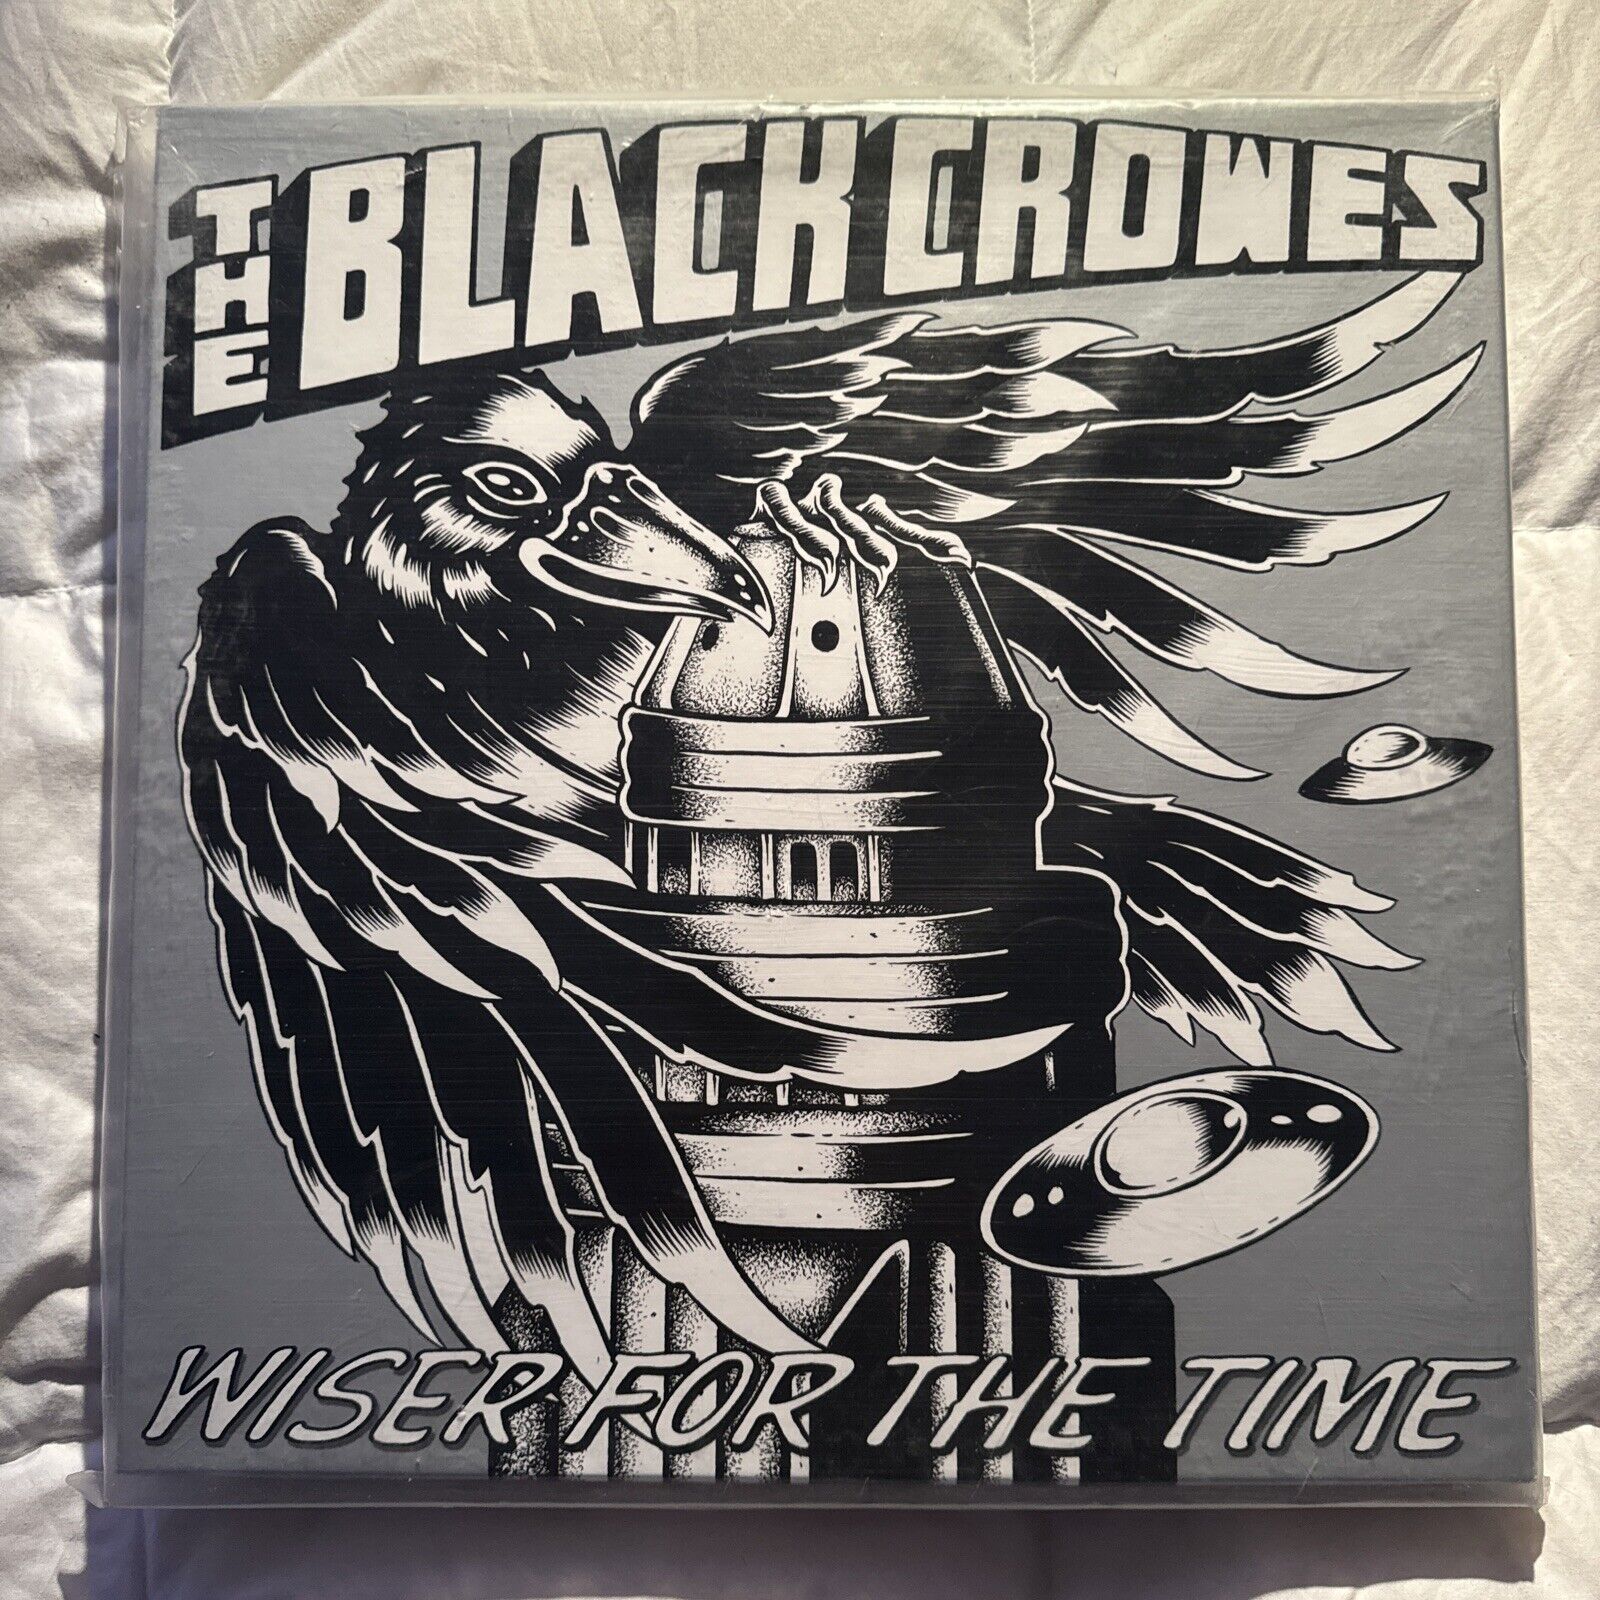 New The Black Crowes Wiser For The Time 4 LP 180 Gram Black & White Marbled LP